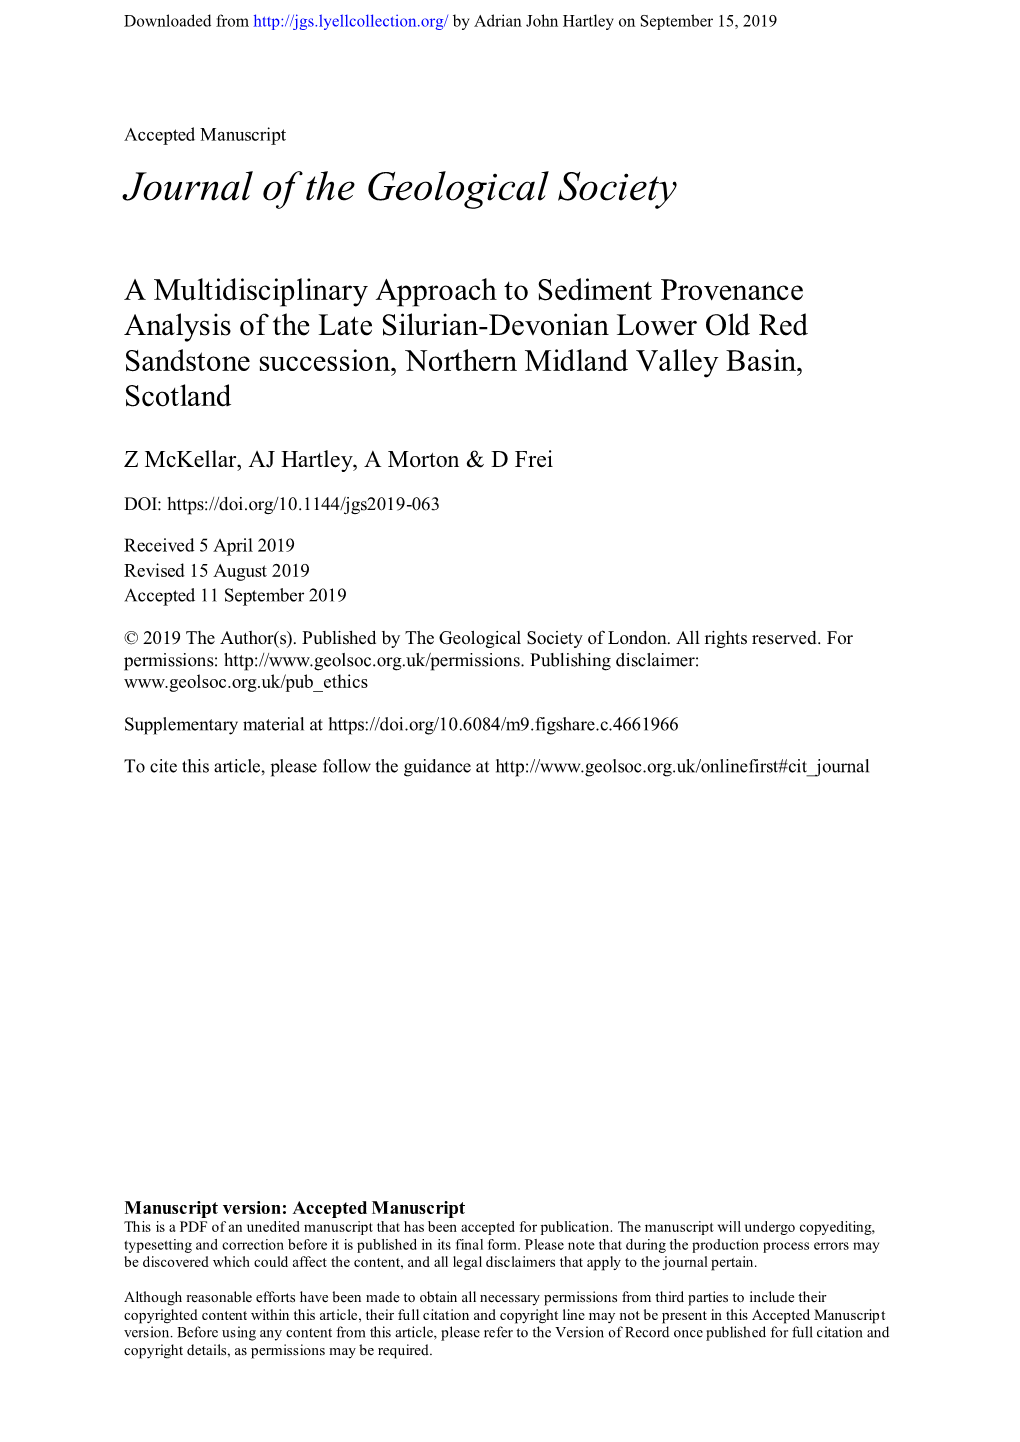 A Multidisciplinary Approach to Sediment Provenance Analysis Of